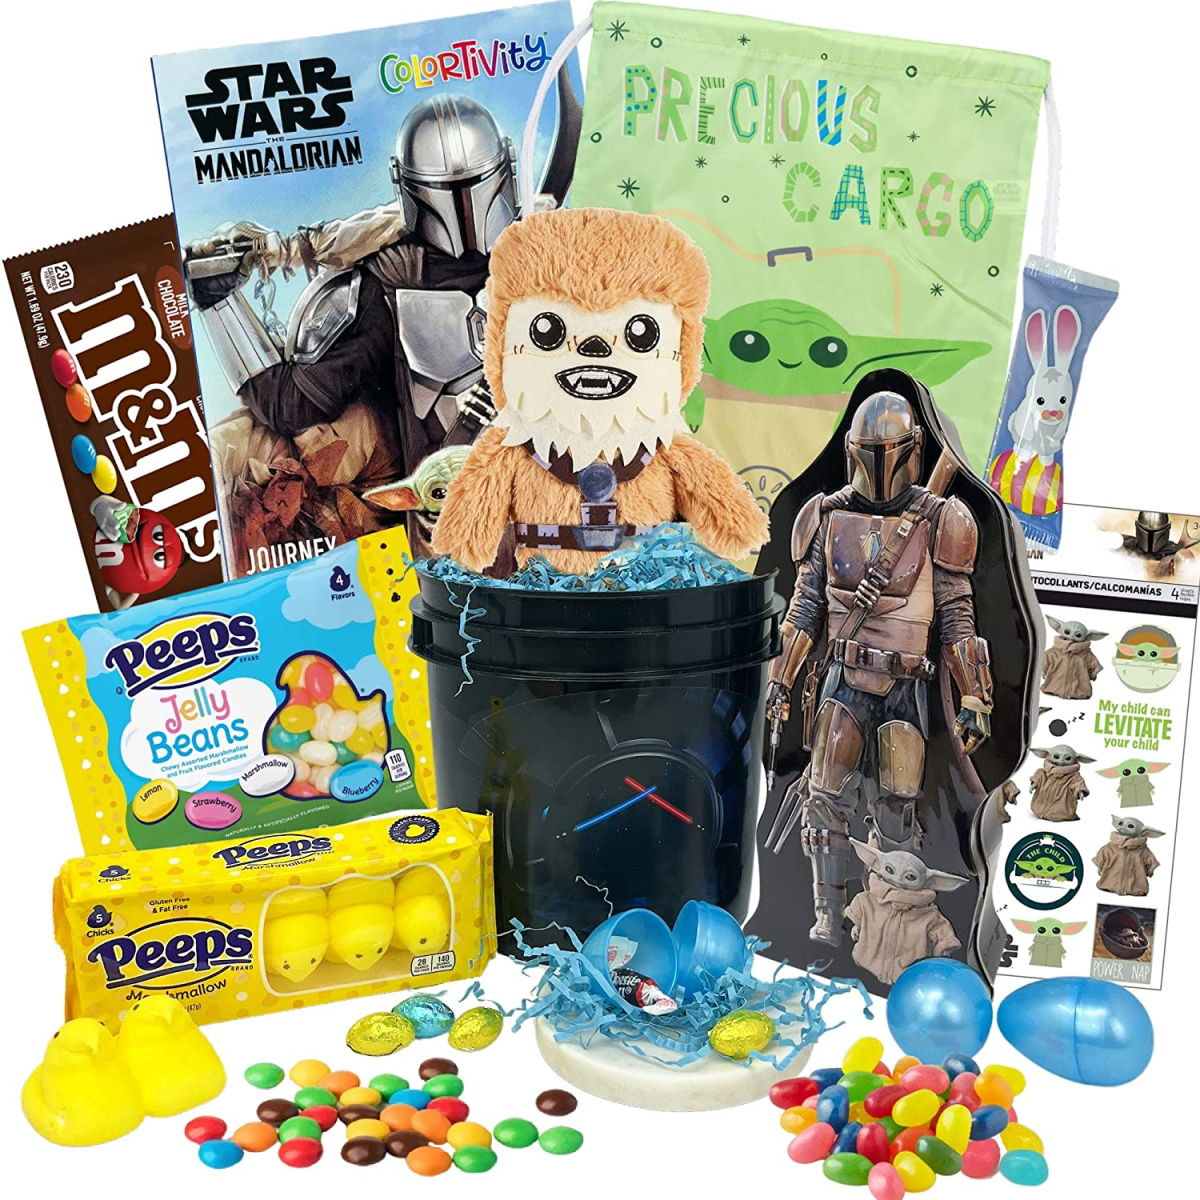 Star Wars pre filled easter basket with candy and figurines